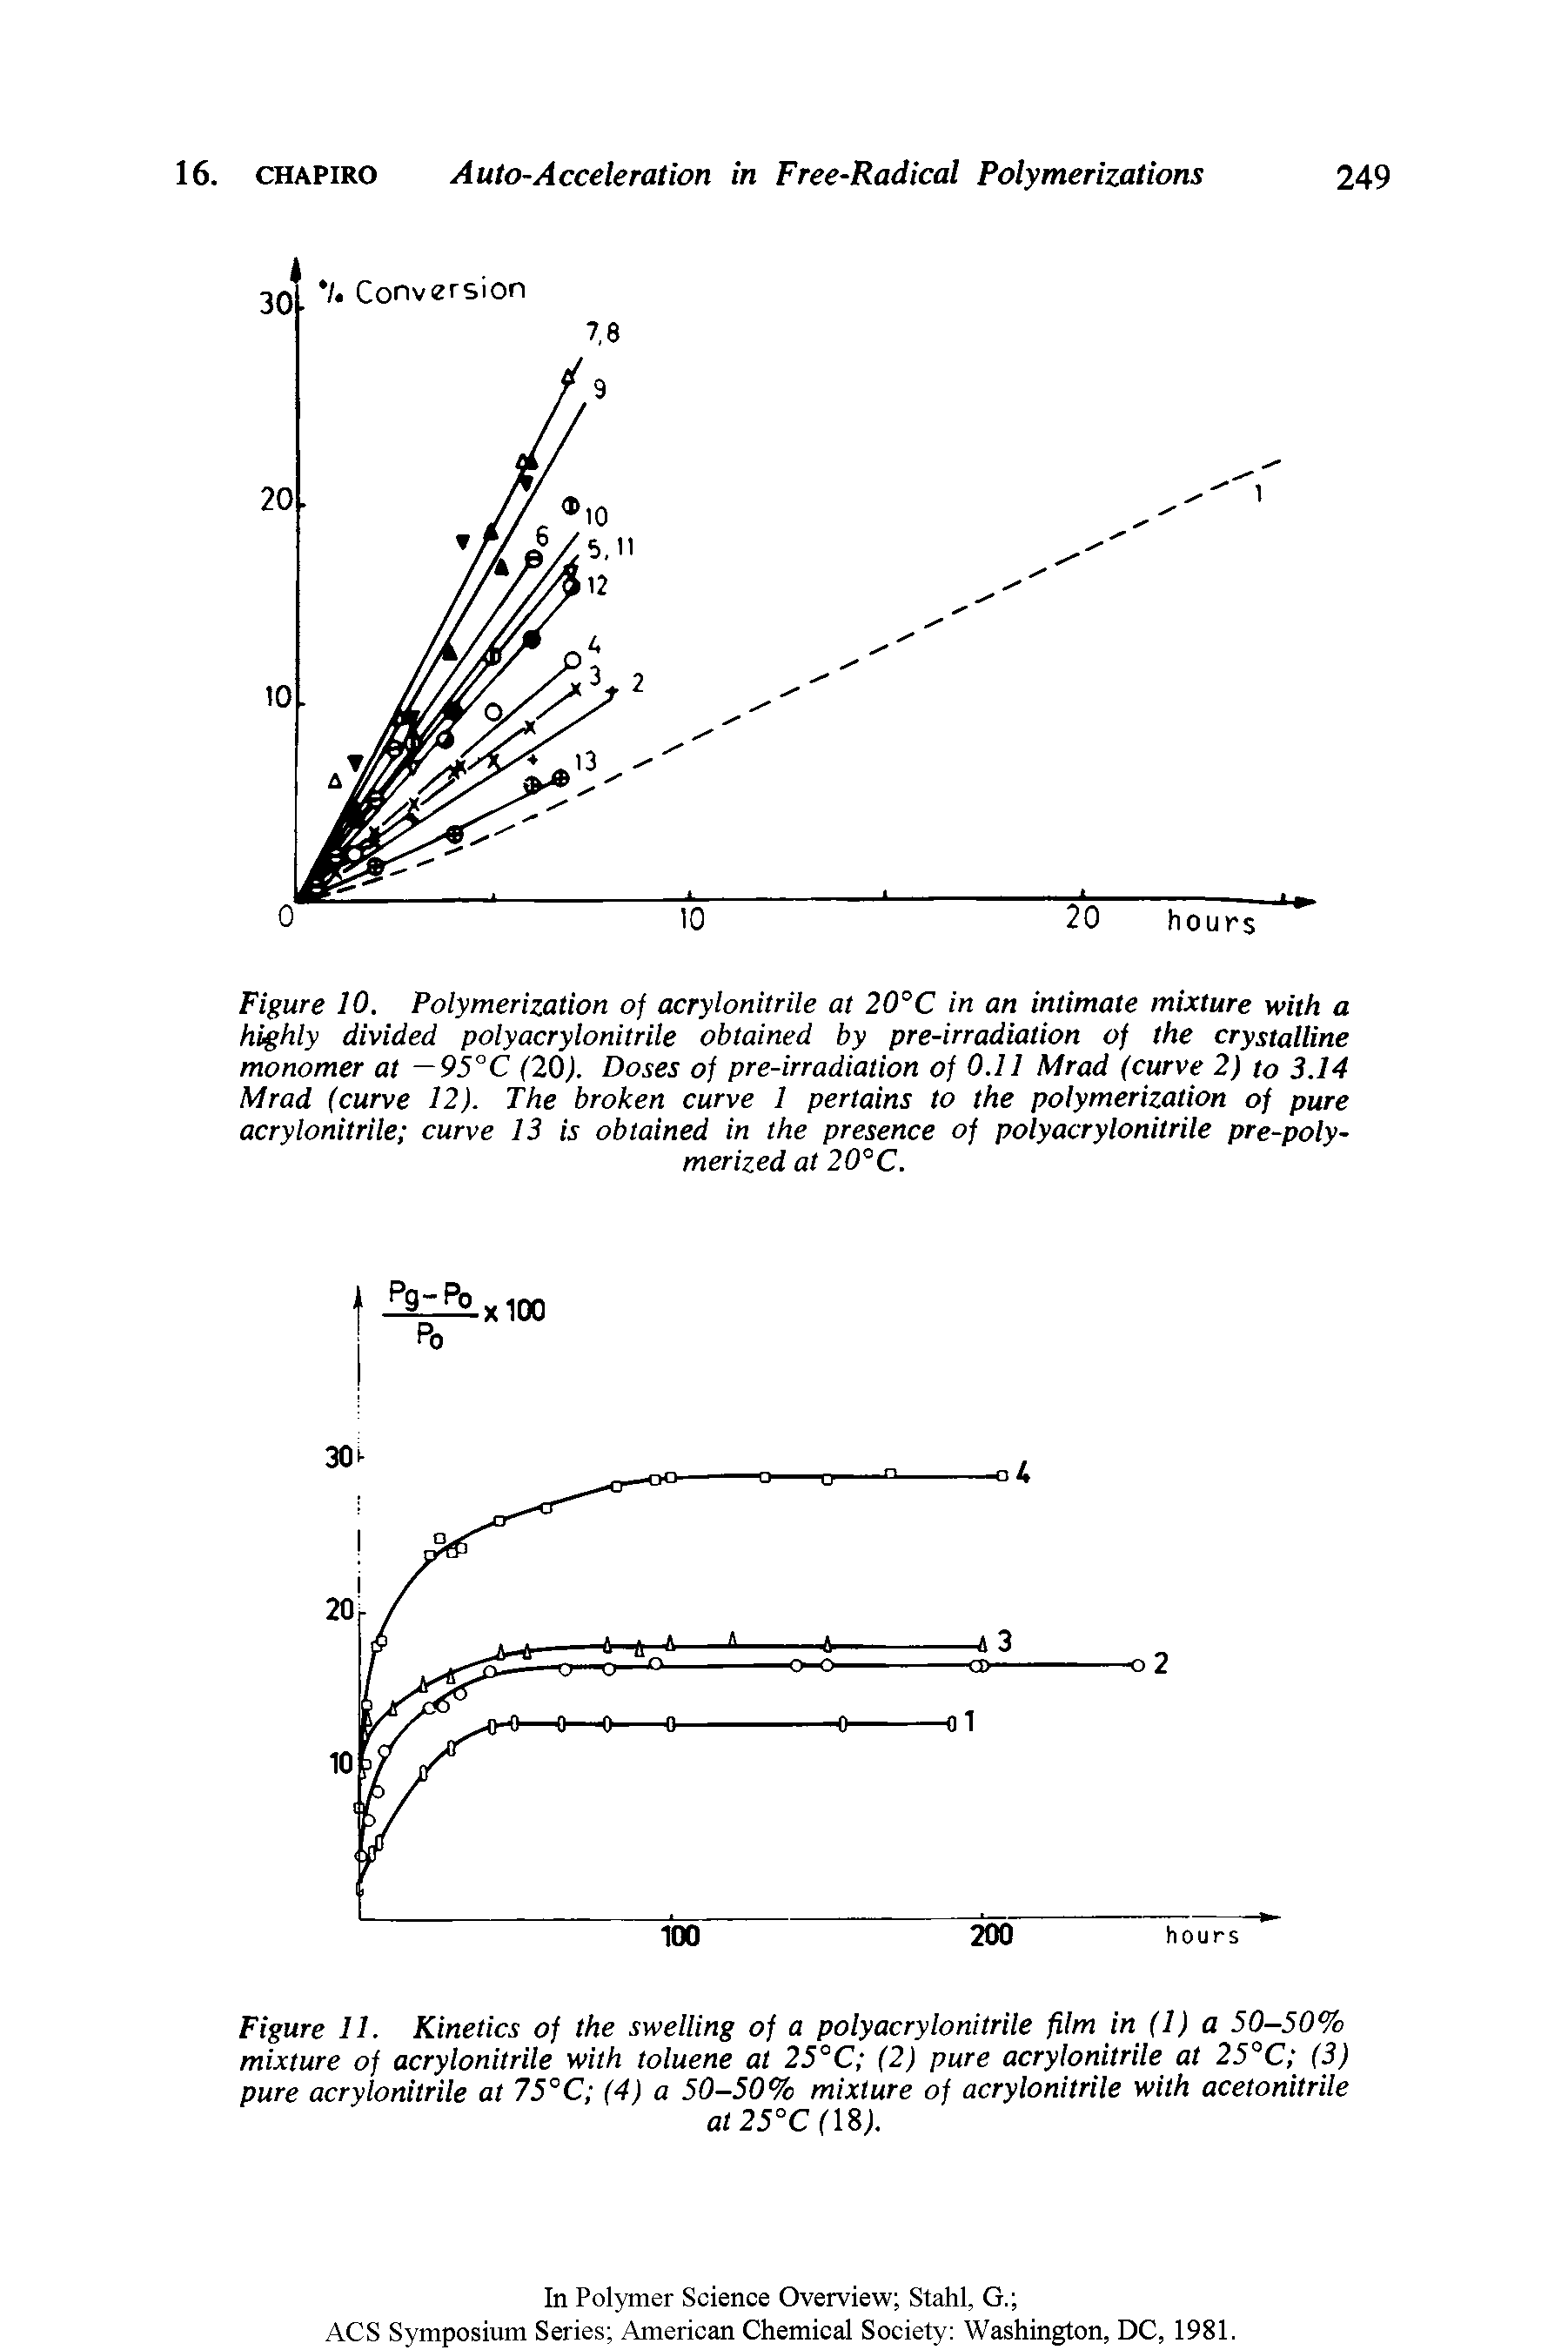 Figure 10. Polymerization of acrylonitrile at 20°C in an intimate mixture with a highly divided polyacrylonitrile obtained by pre-irradiation of the crystalline monomer at 95°C (20). Doses of pre-irradiation of 0.11 Mrad (curve 2) to 3.14 Mrad (curve 12). The broken curve 1 pertains to the polymerization of pure acrylonitrile curve 13 is obtained in the presence of polyacrylonitrile pre-poly-...